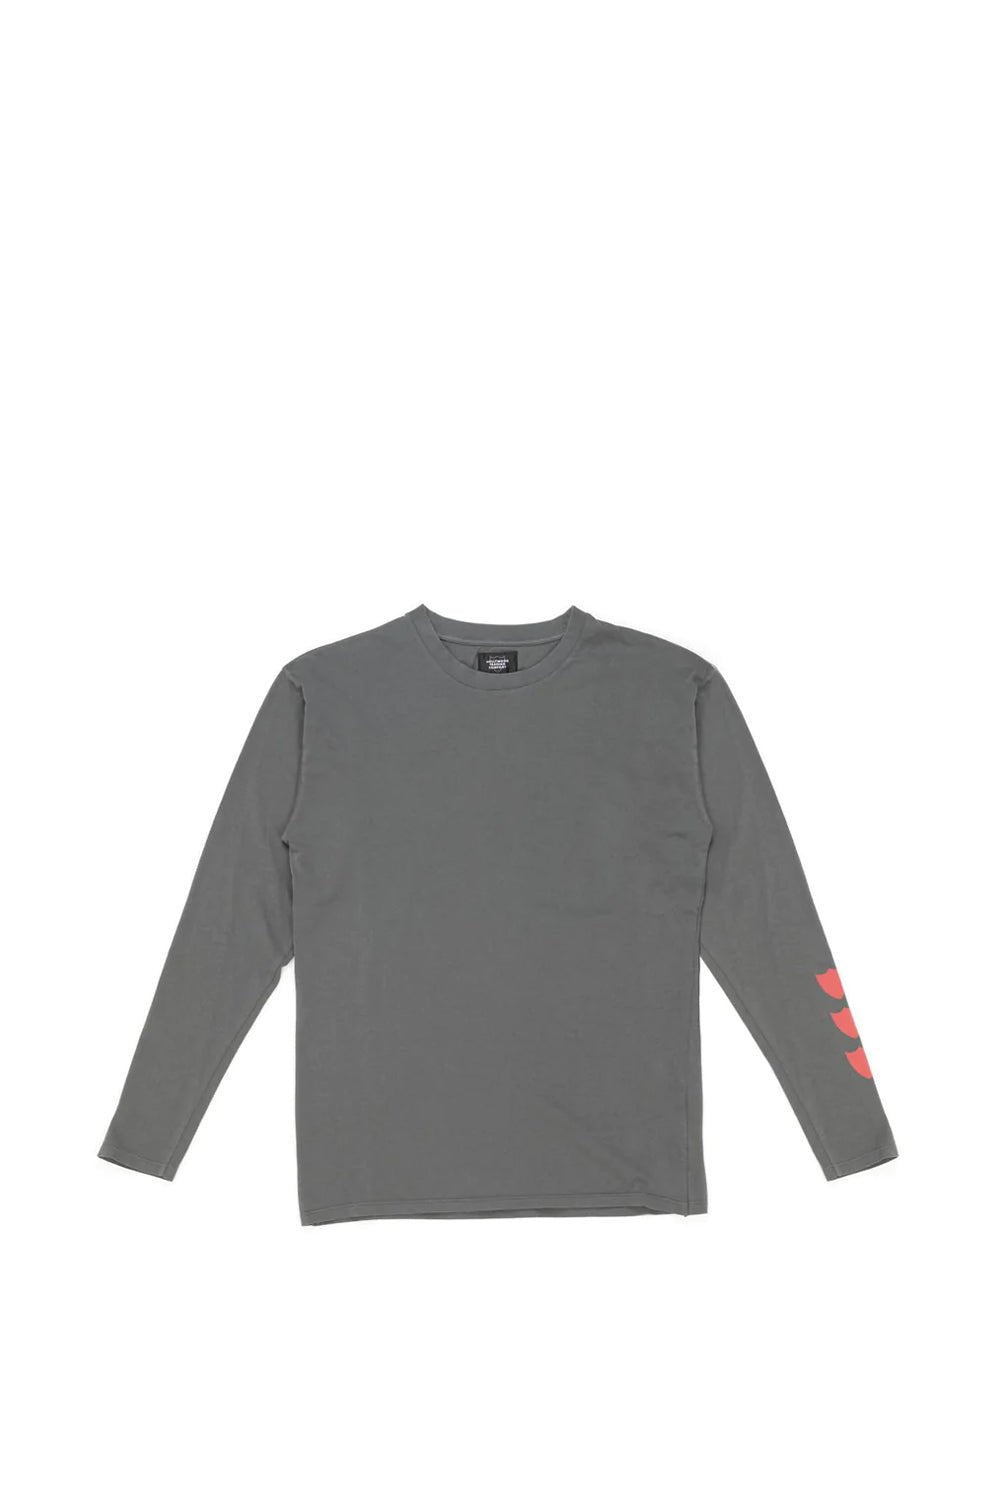 SHIELDS LS T-SHIRT Regular fit long sleeve t-shirt with logo prints on the sleeve. HTC LOS ANGELES